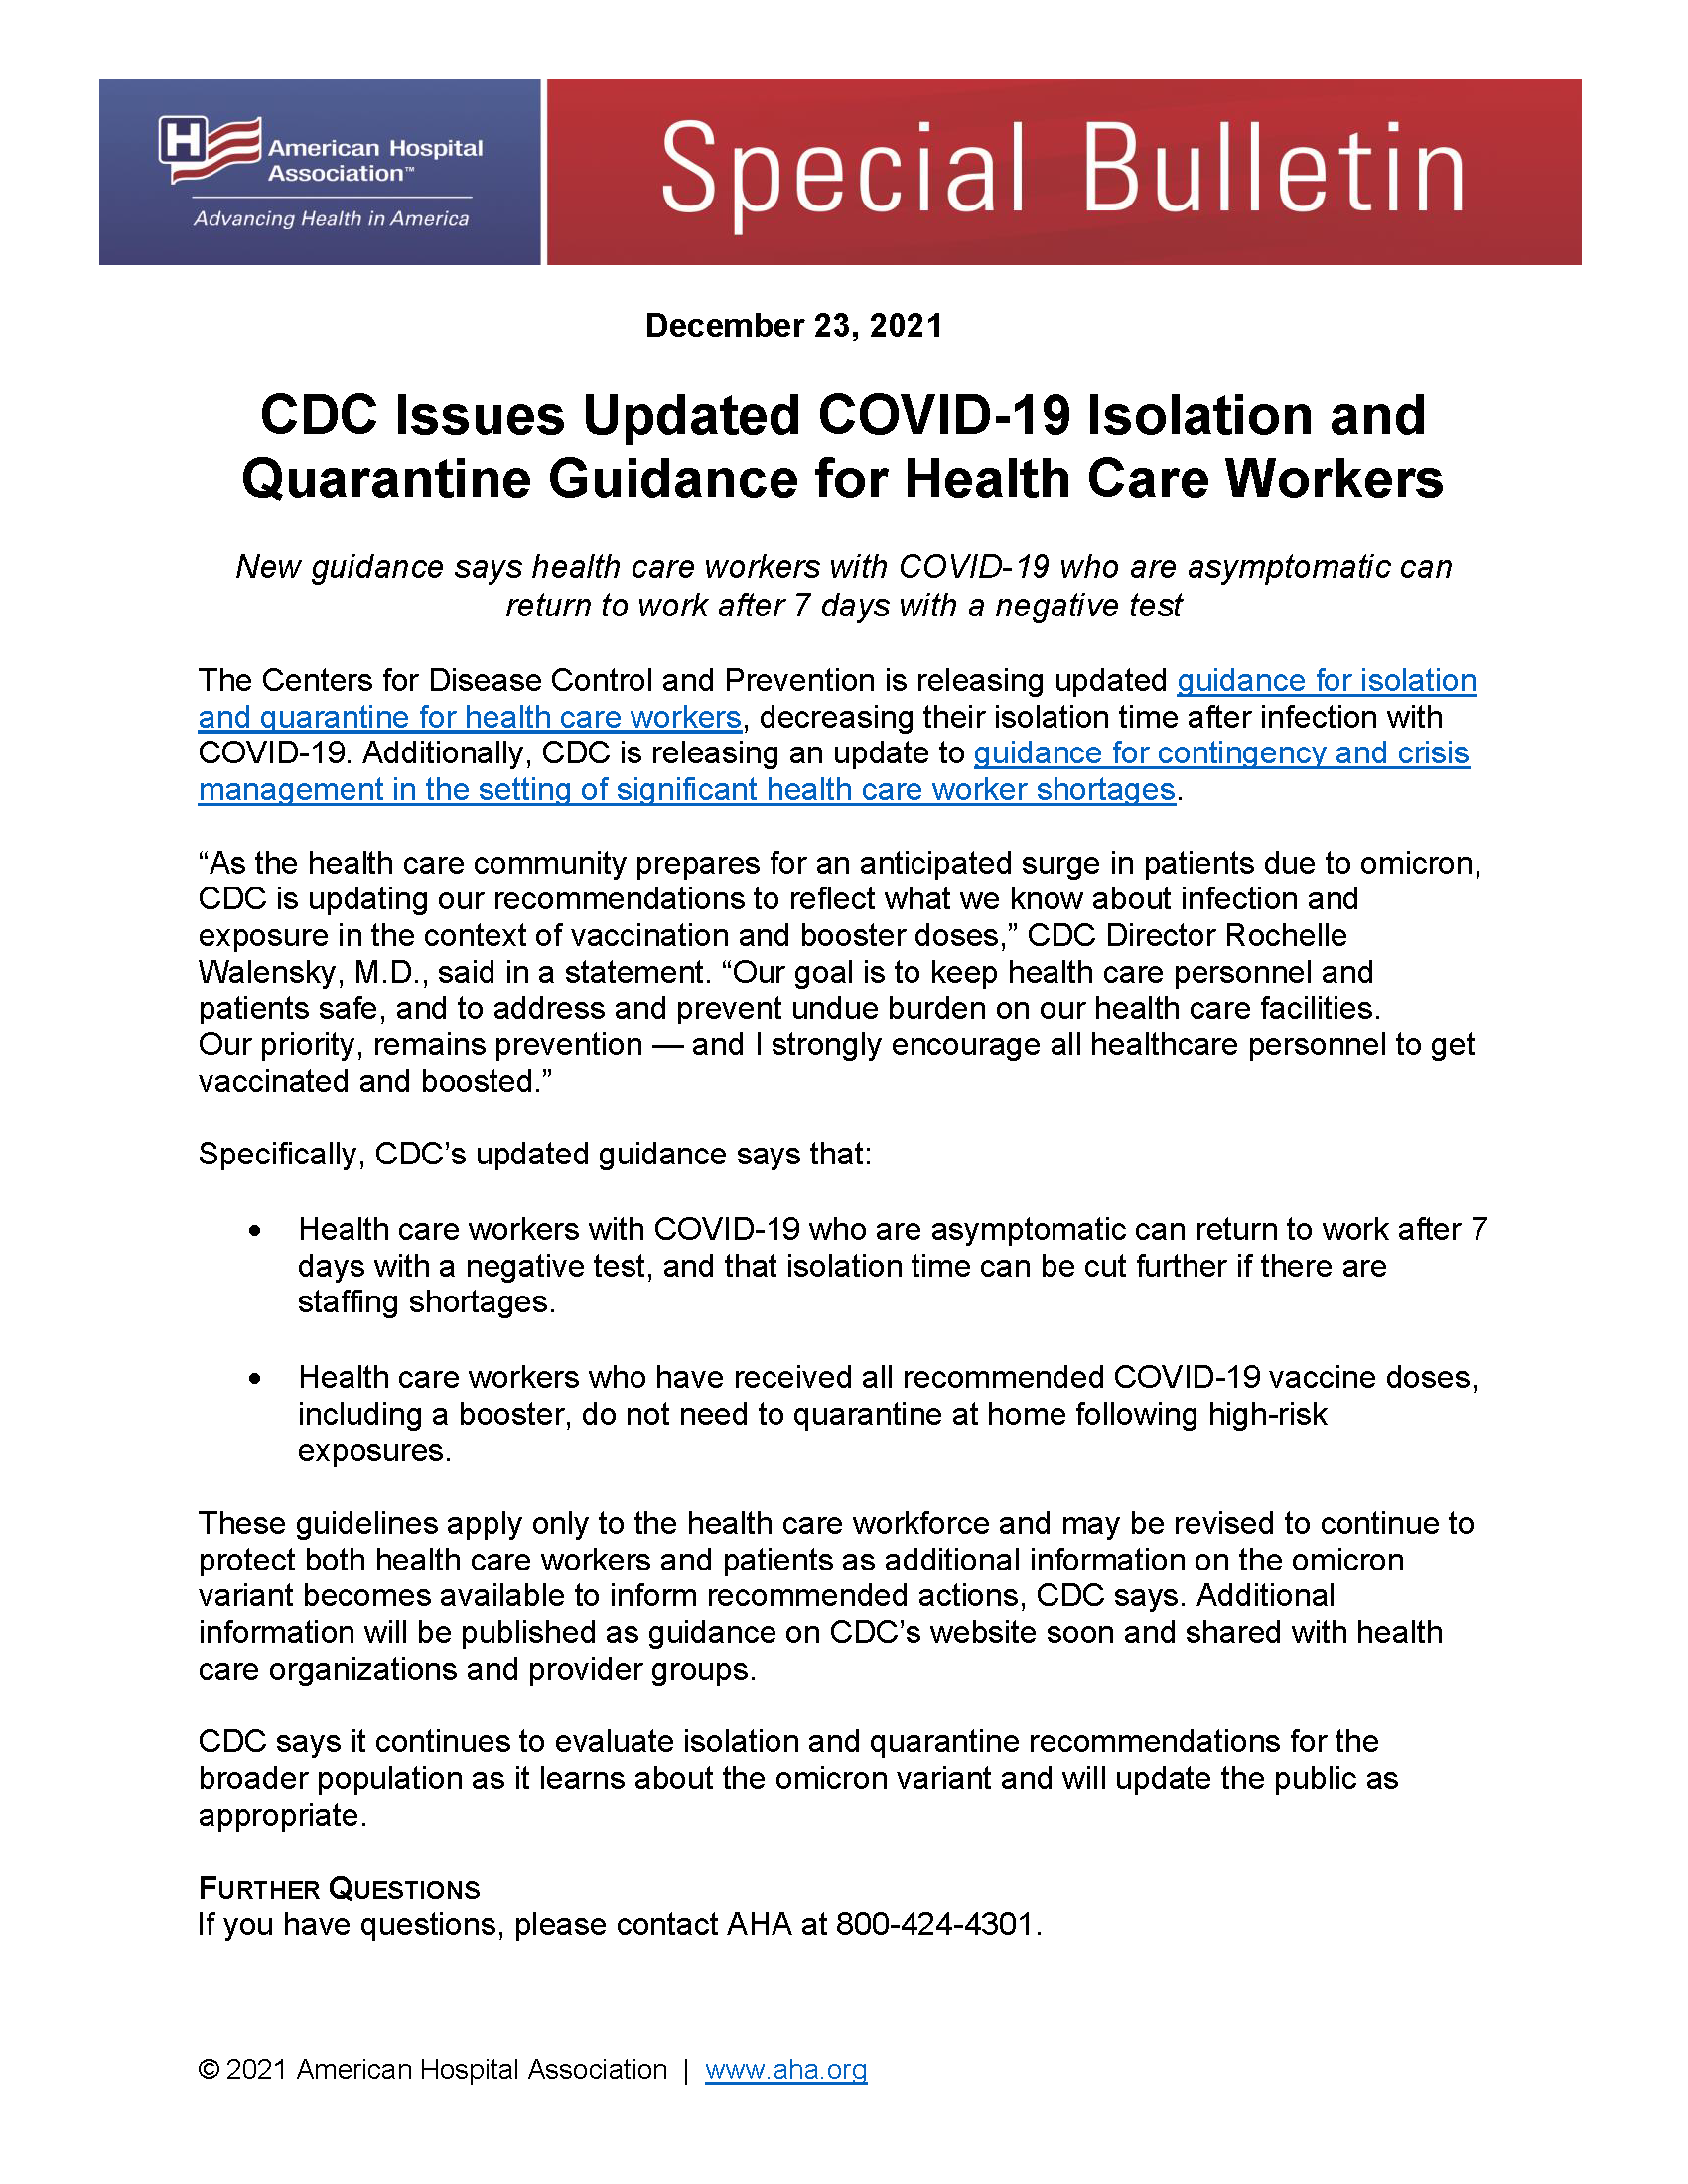 Special Bulletin: CDC Issues Updated COVID-19 Isolation and Quarantine Guidance for Health Care Workers.